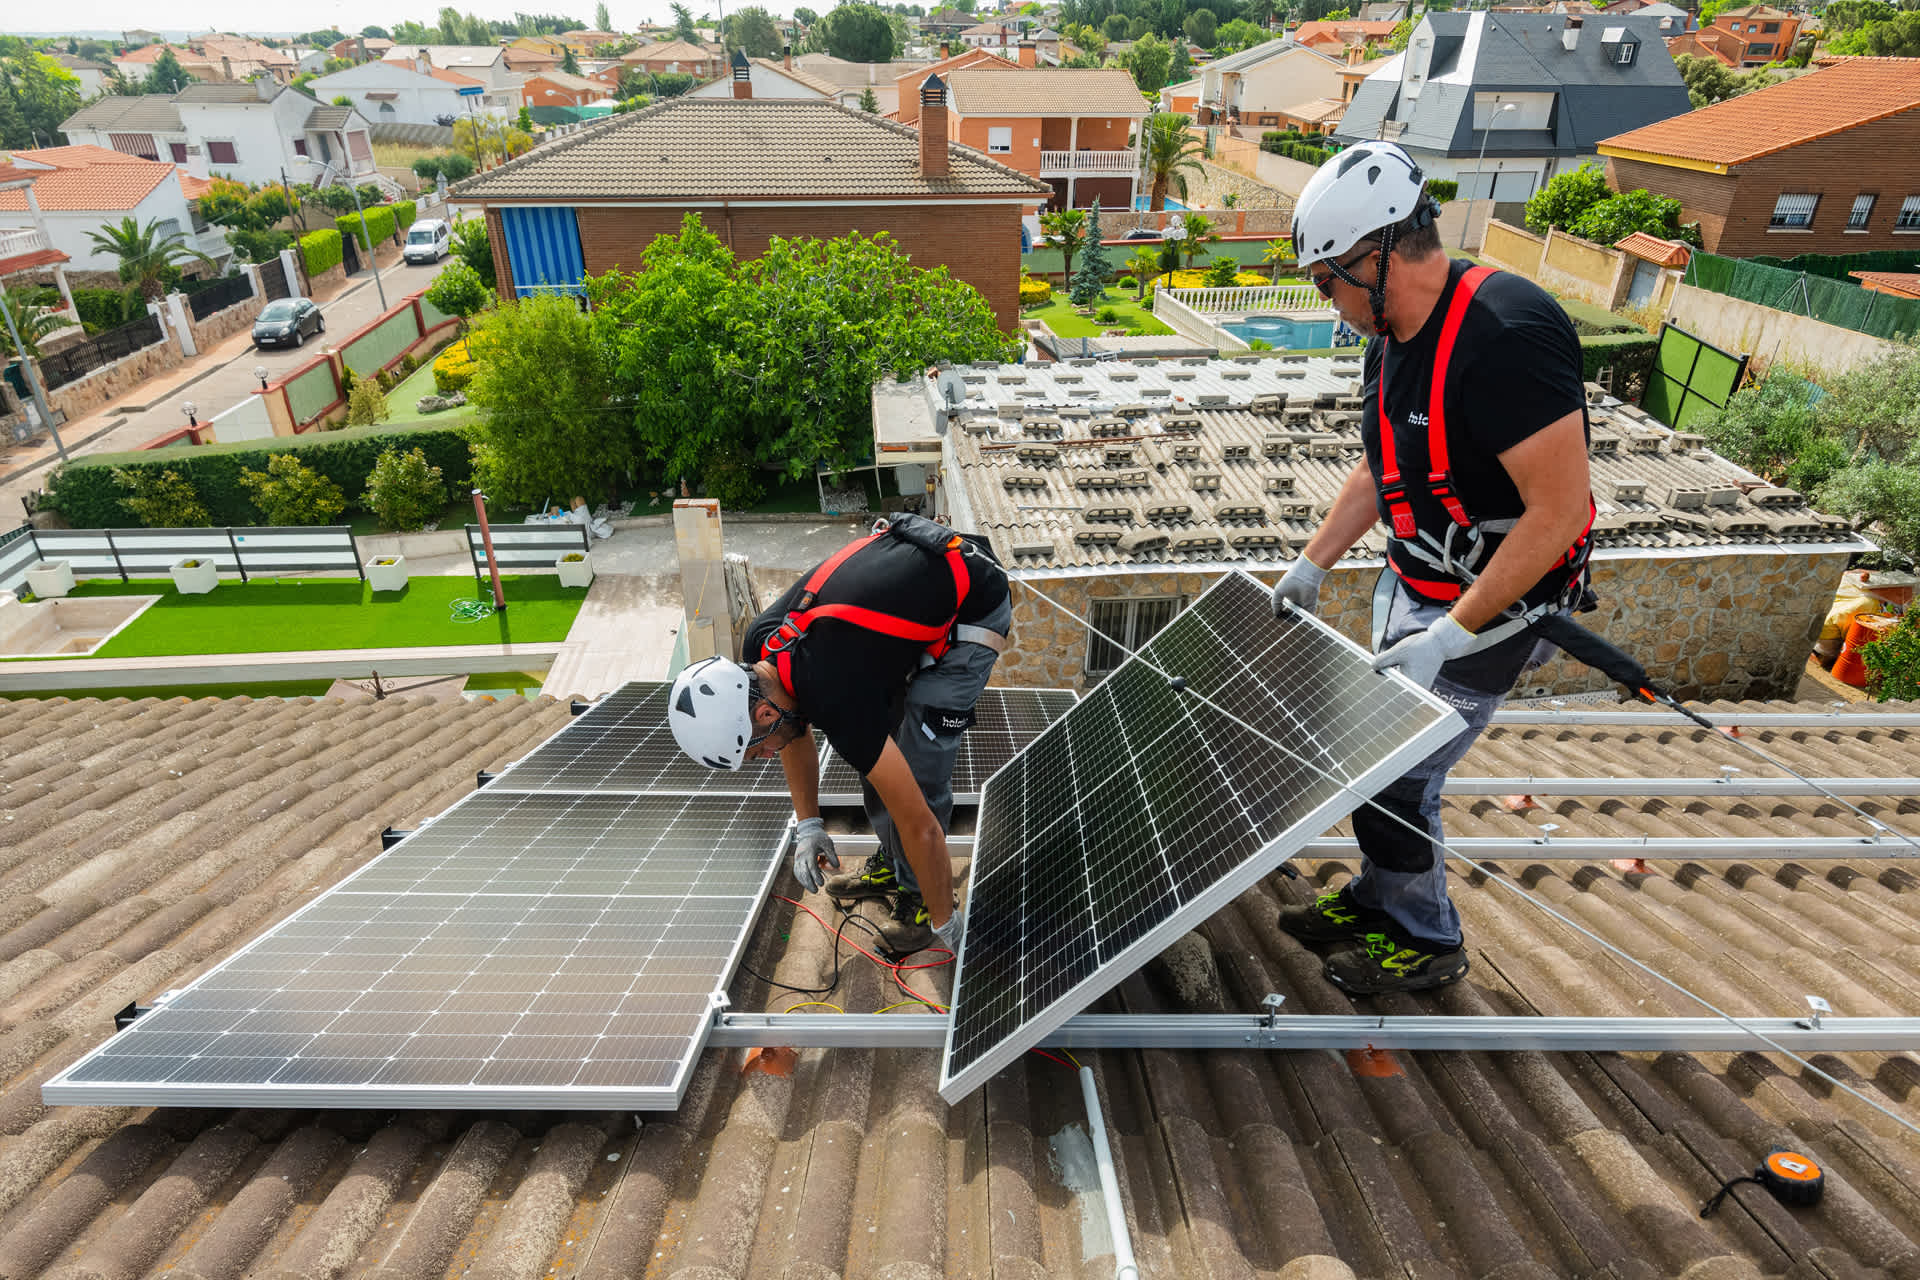 A duo of engineers installing solar panels on the roof of a residence in Spain.